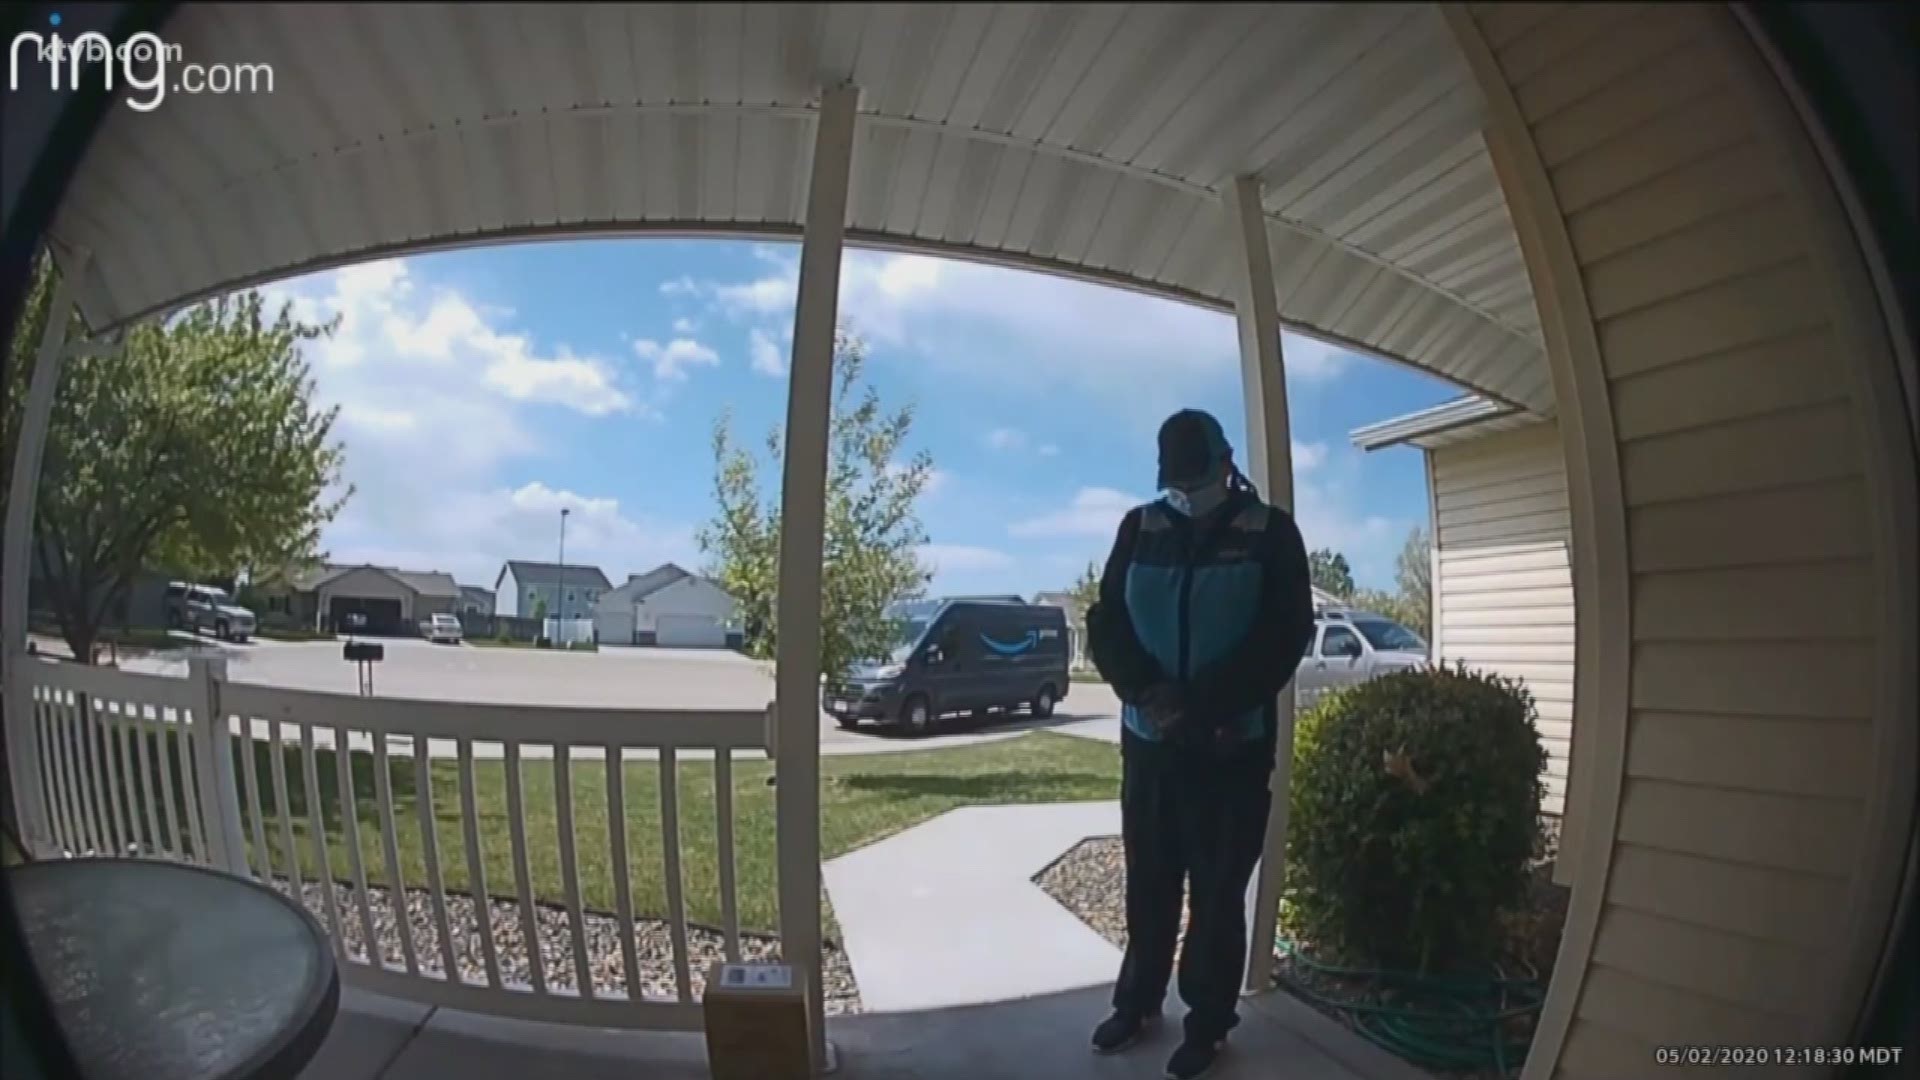 As Monica Salinas was delivering food for an at-risk baby in Nampa, she stopped to say a prayer. That prayer was captured on the family's RING doorbell camera.